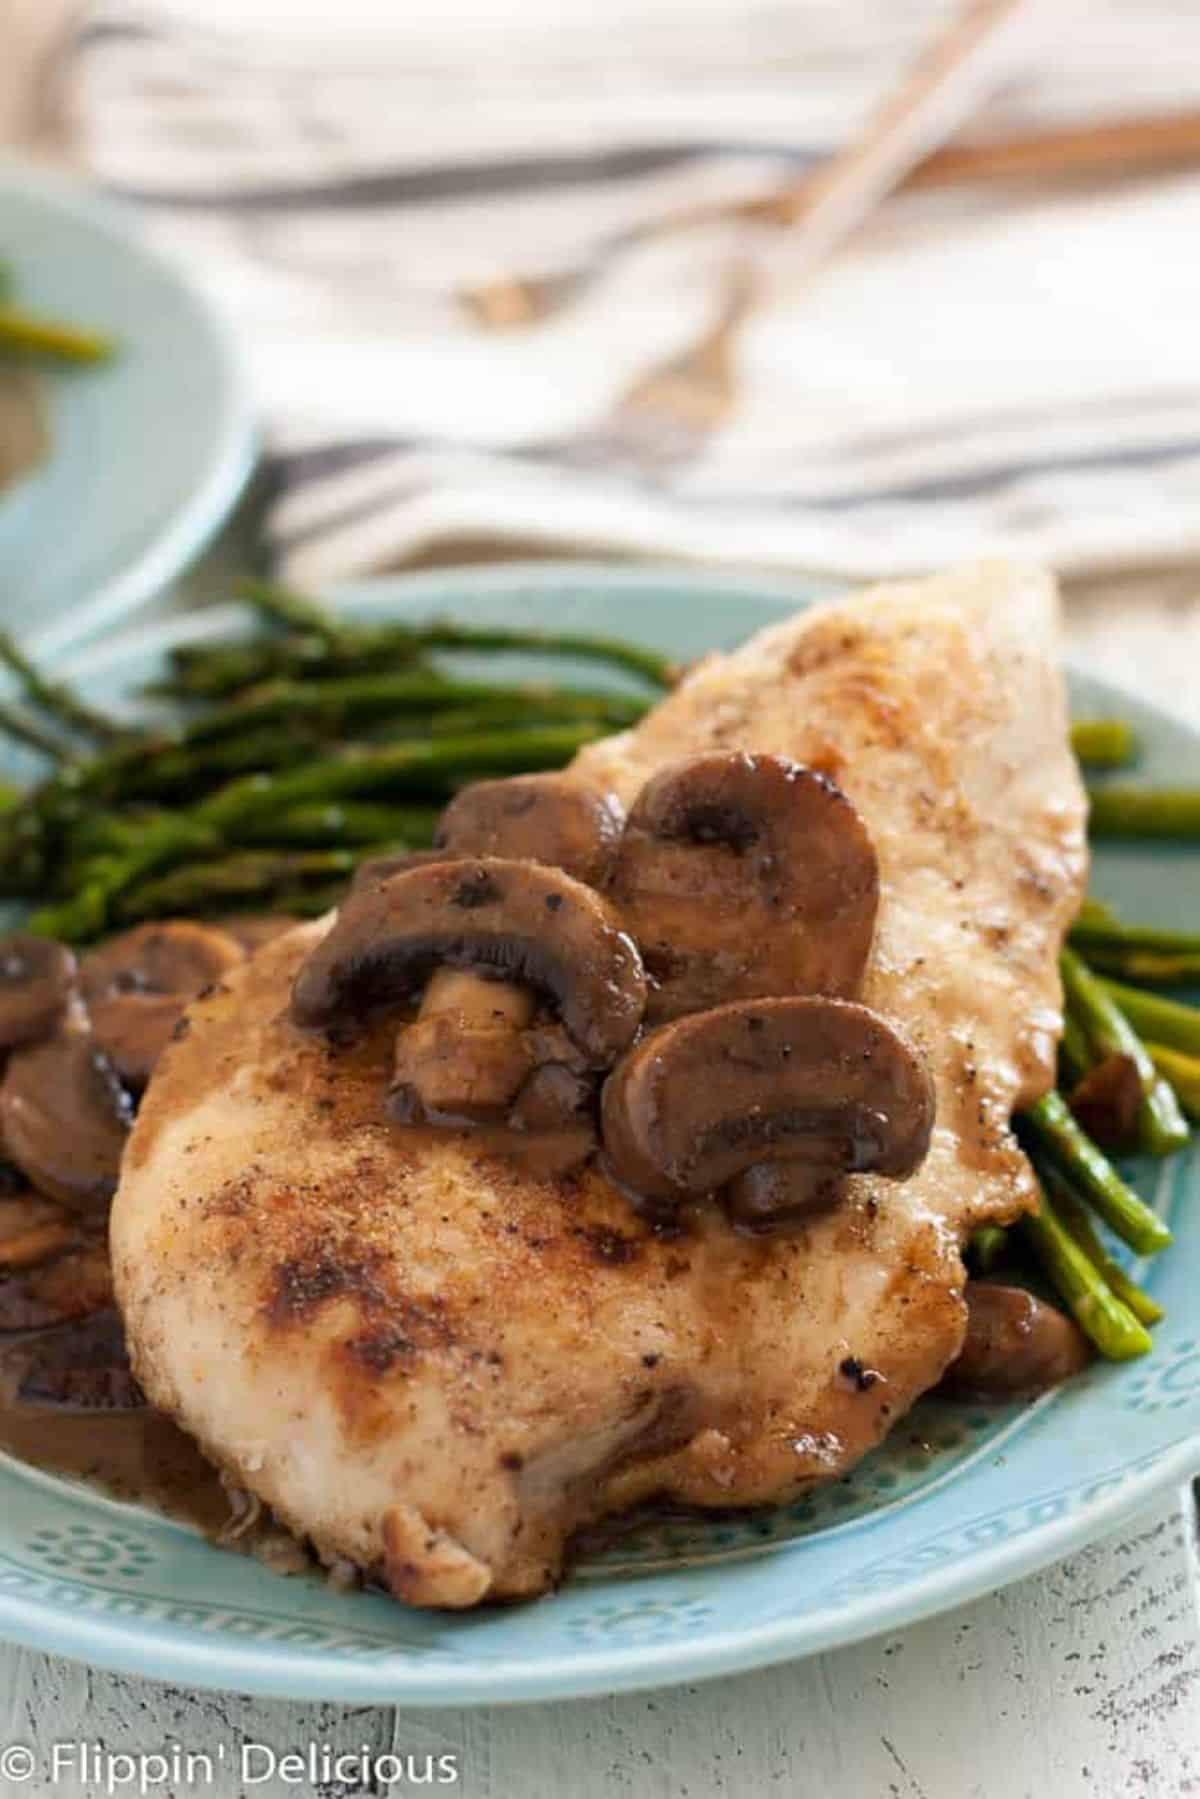 A piece of Gluten-Free Chicken Marsala with Mushrooms with asparagus on a blue plate.